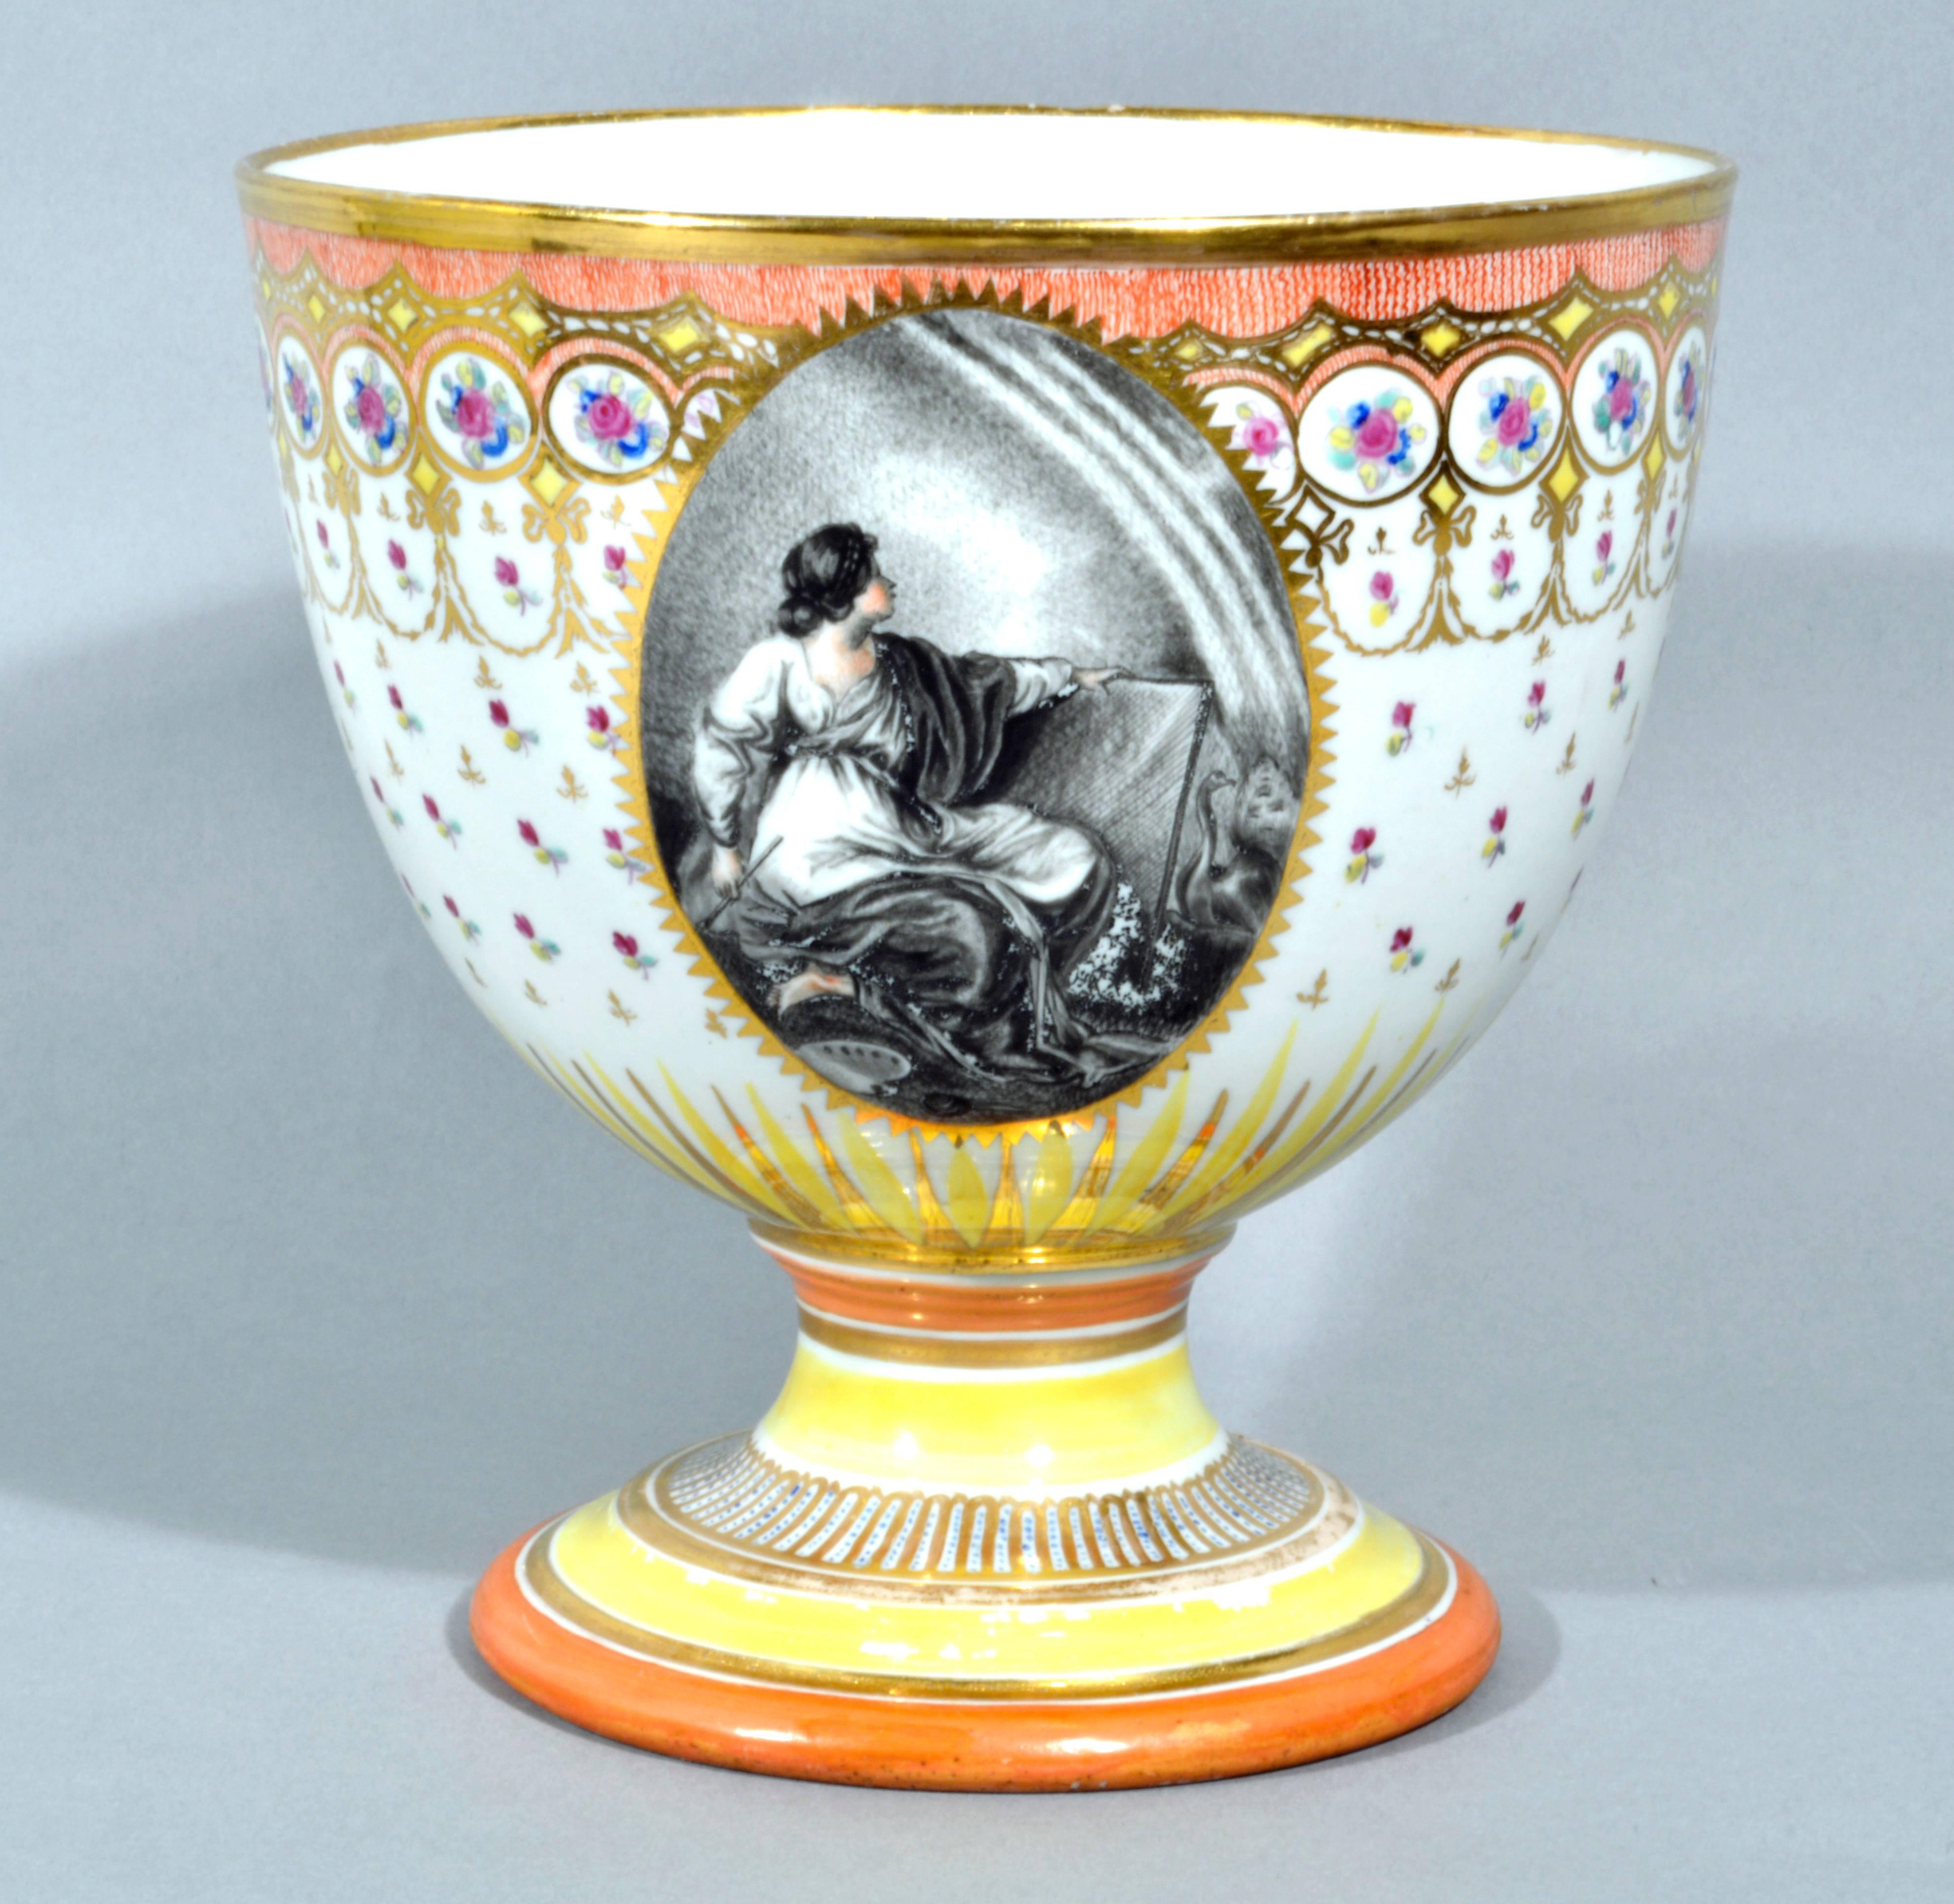 The large Regency Neoclassical, Humphrey Chamberlain decorated, Chamberlain Worcester Goglet is painted with a grisaille painting by Humphrey Chamberlain after Angelia Kauffman painting of the figure of design.

The large goblet has a central oval